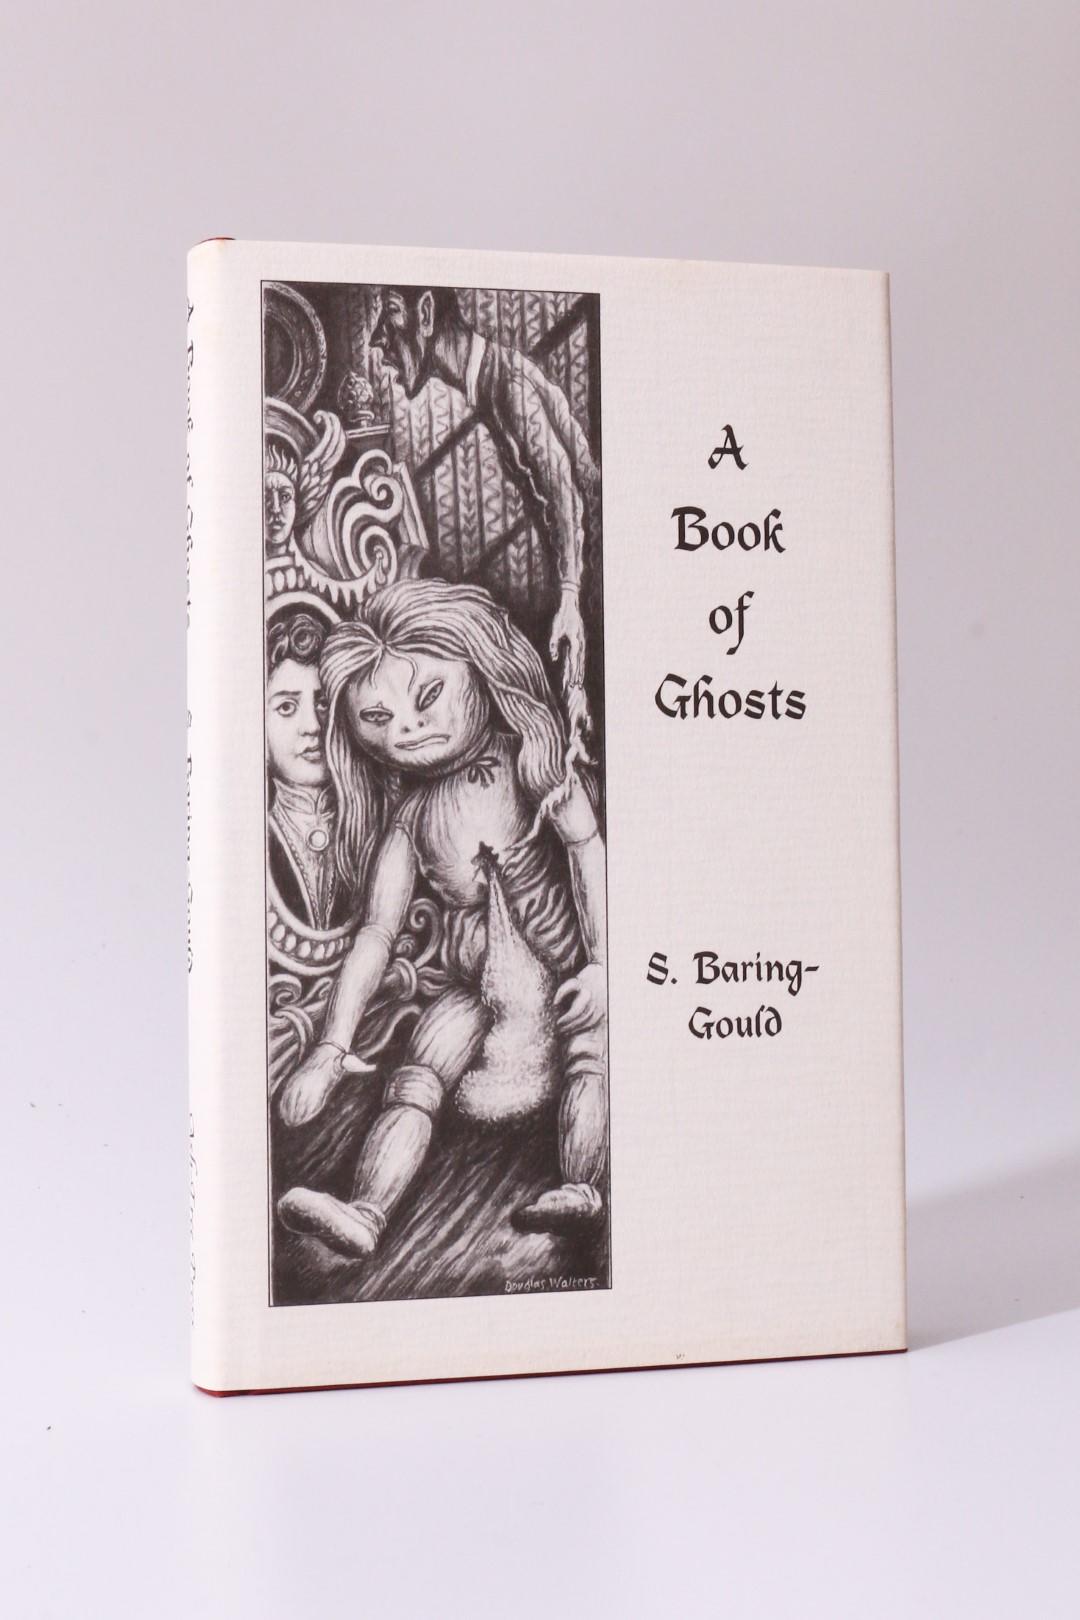 S. Baring-Gould - A Book of Ghosts - Ash-Tree Press, 1996, Limited Edition.